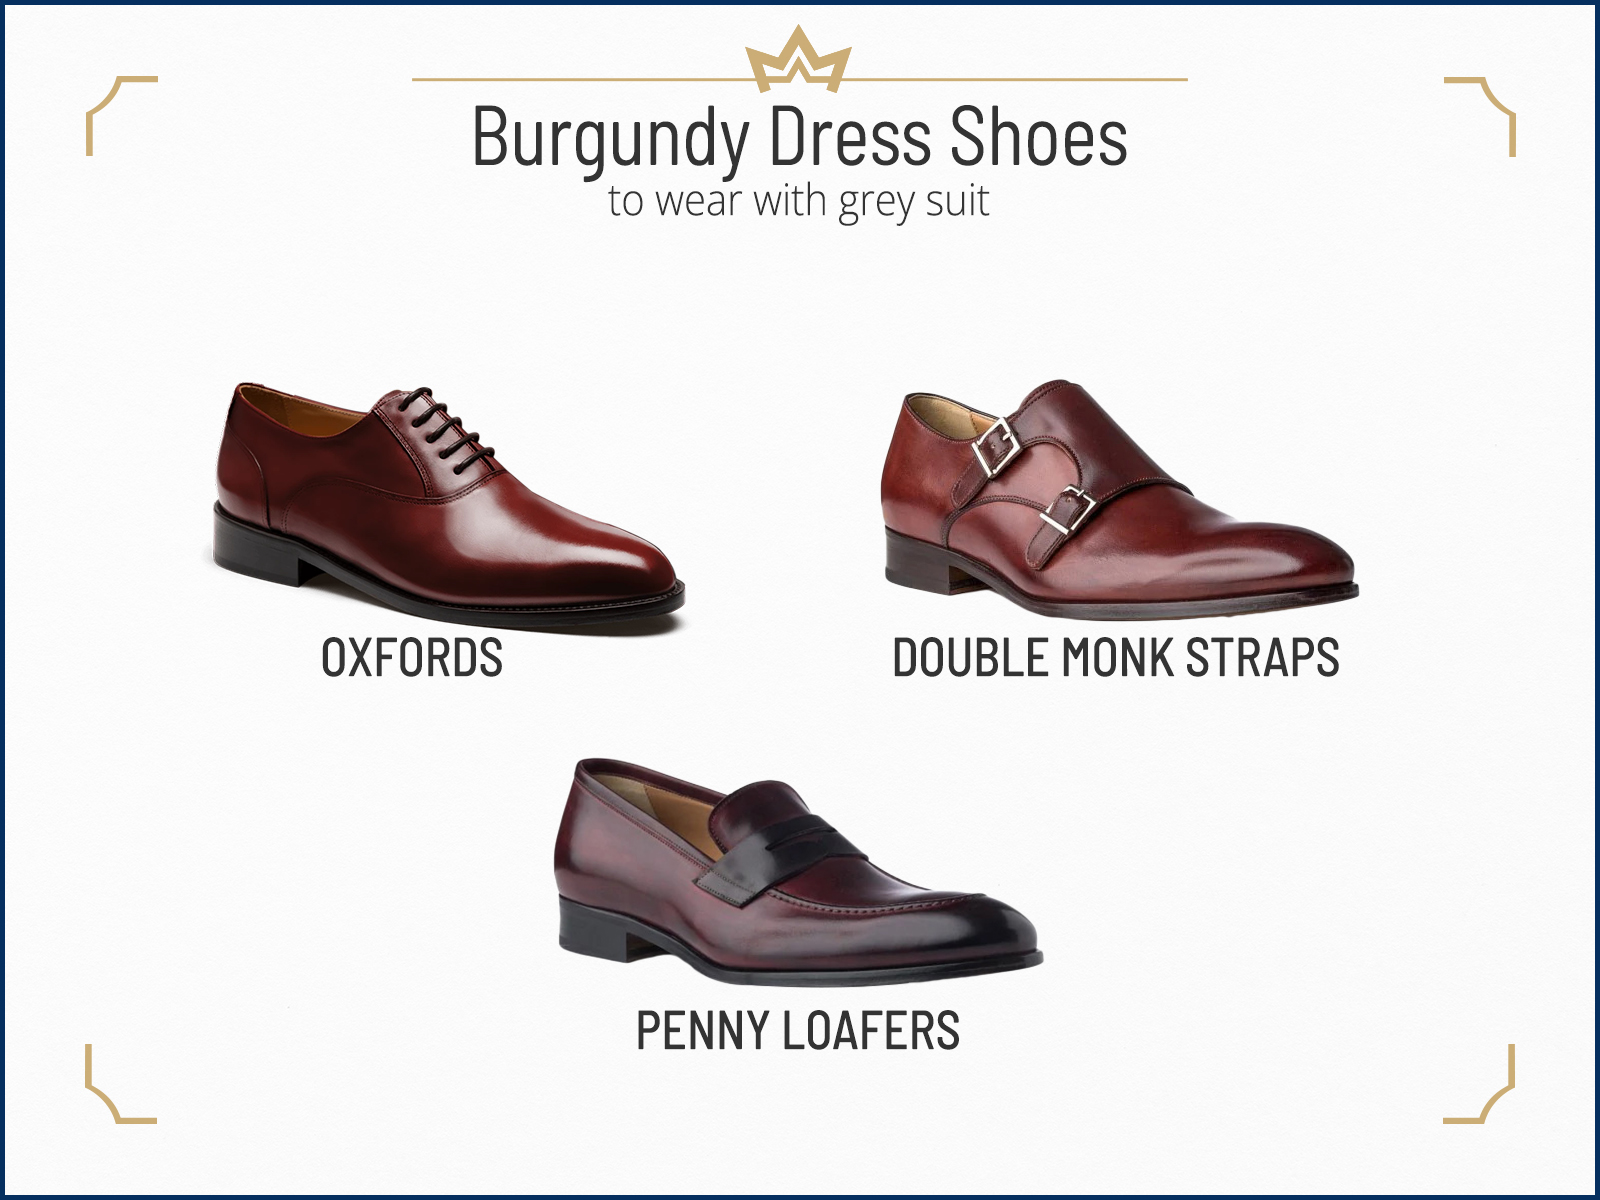 Recommended burgundy dress shoe types for grey suits